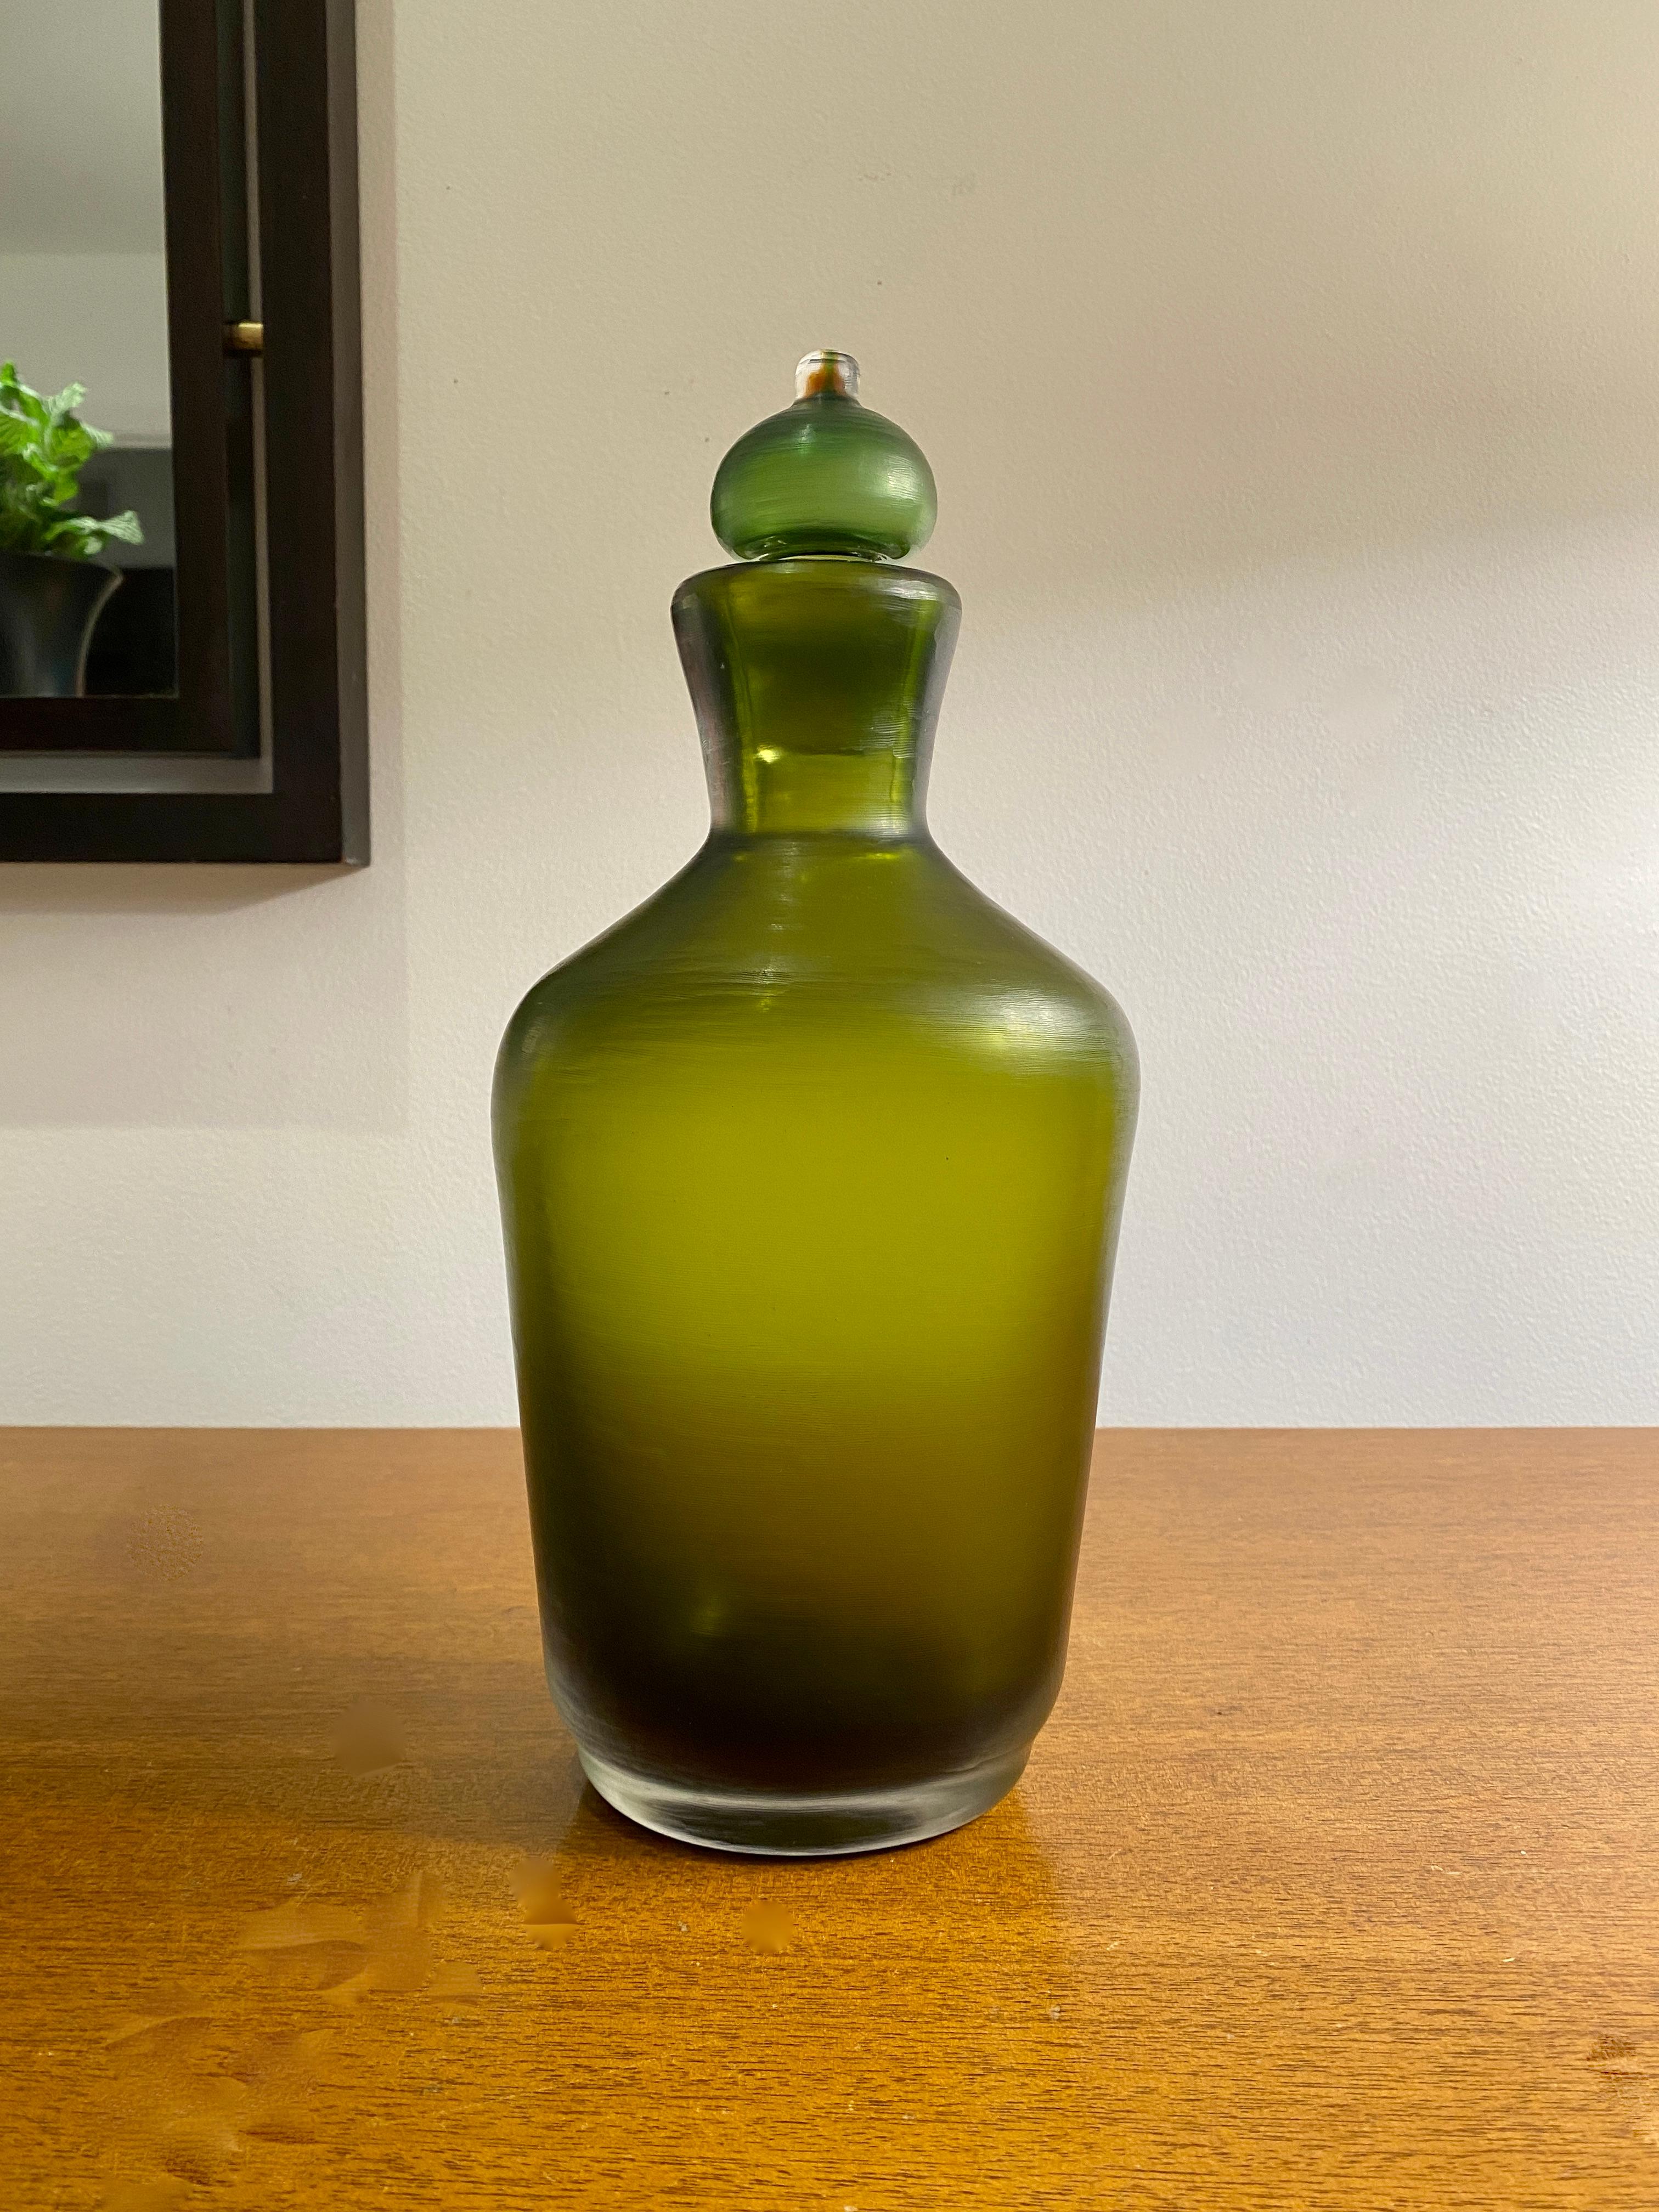 A beautiful bottle with stopper by Paolo Venini for Venini from the 1950's. The bottle is 